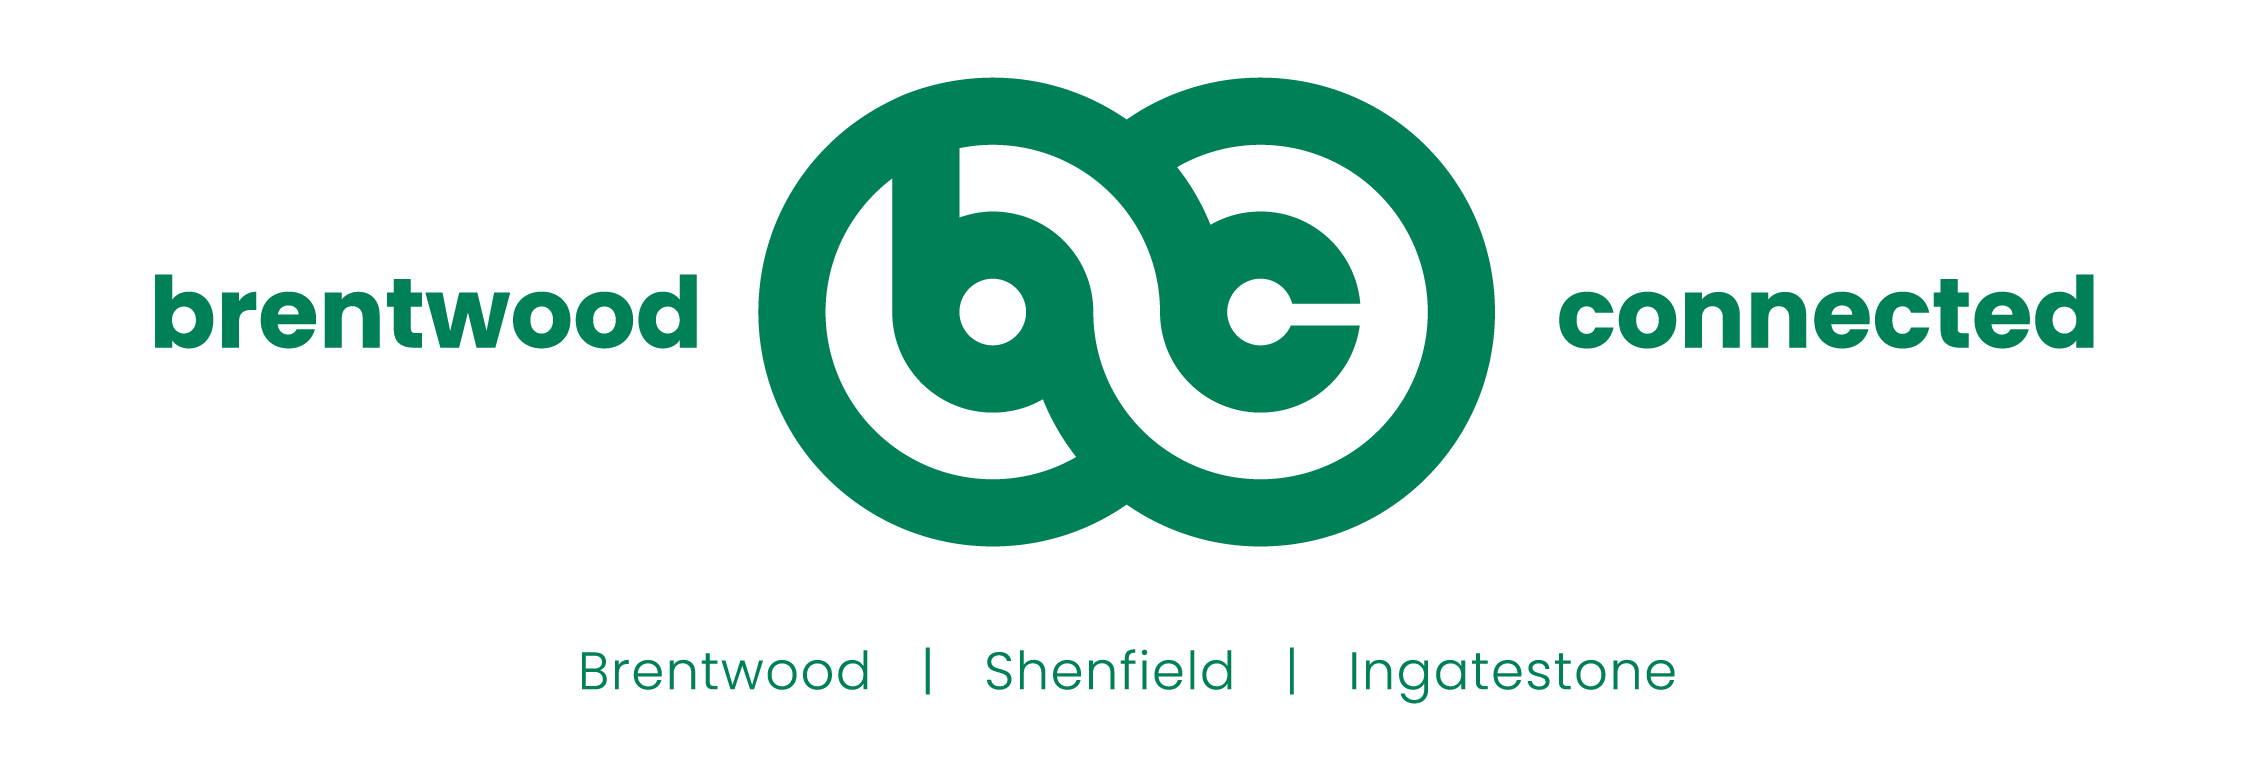 Brentwood Connected logo, strapline Brentwood, Shenfield and Ingatestone